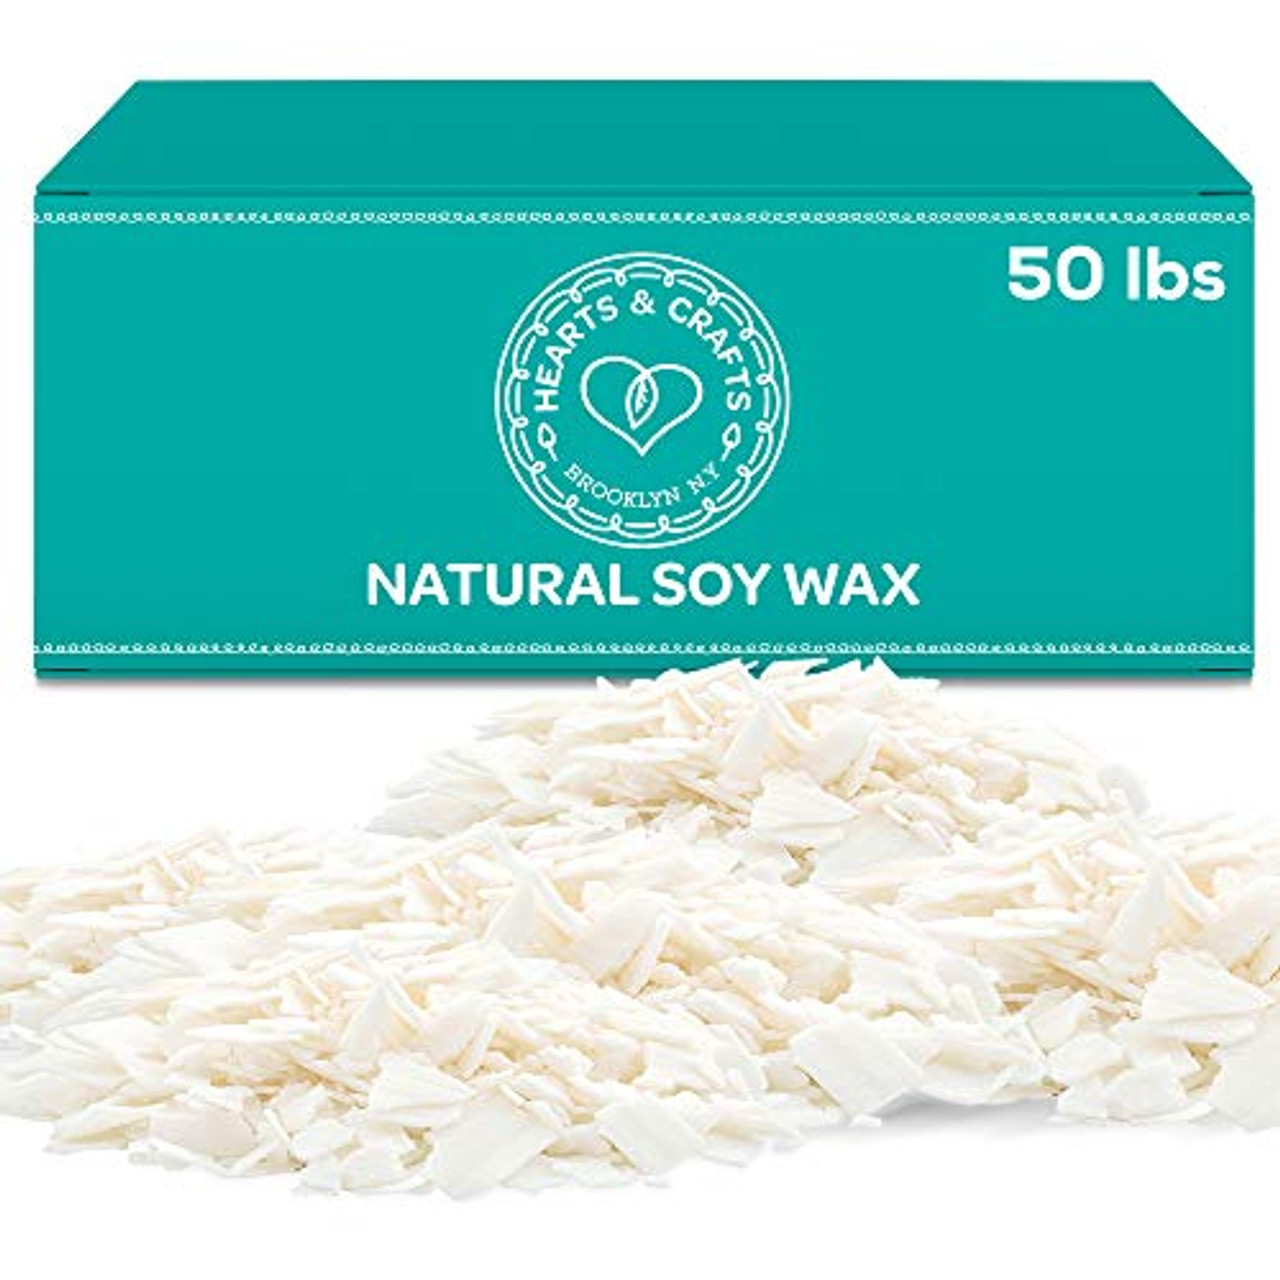 Candle Shop - White Color Dye for 45 lb of Wax - Candle dye Chips for  Making Candles - Candle Wax Dye